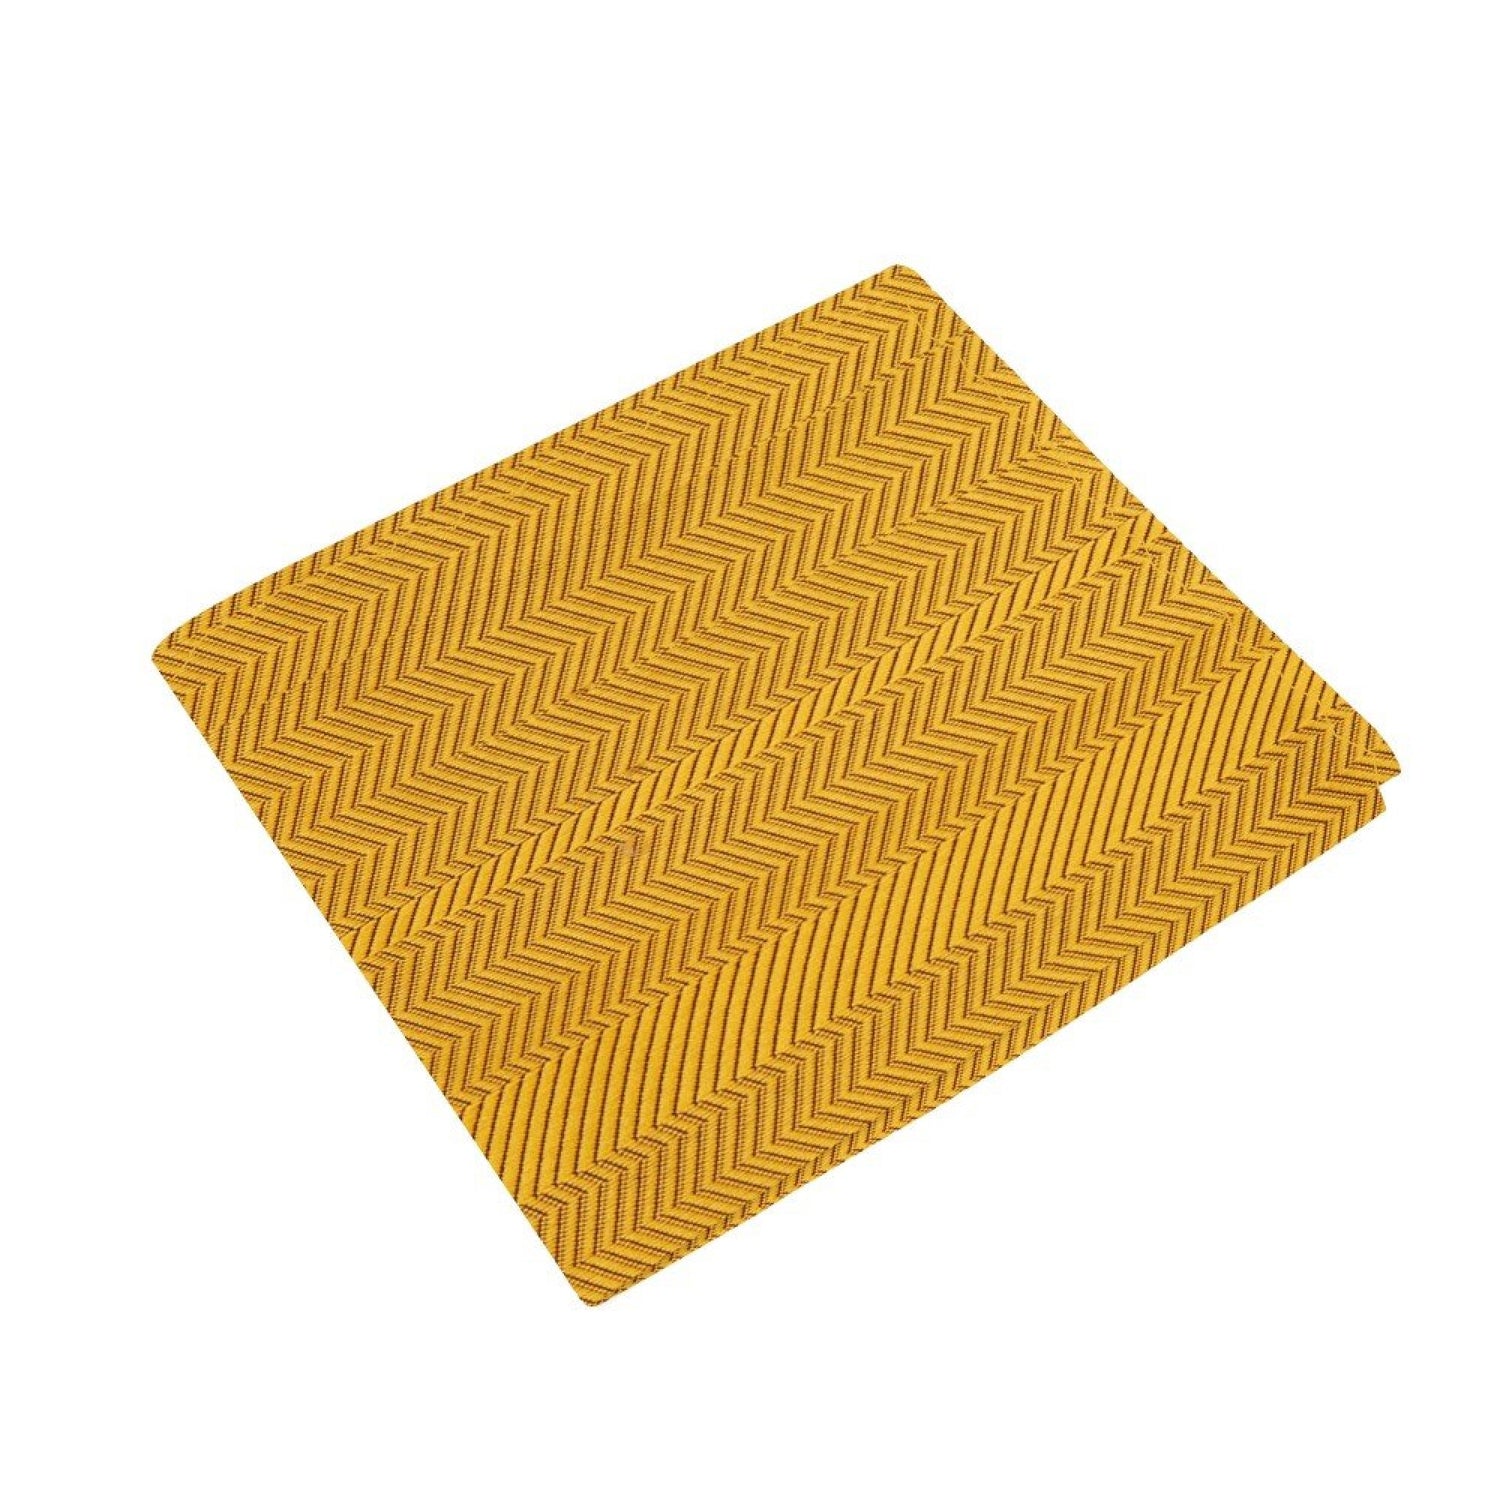 A Solid Golden Amber Yellow Color with Sophisticated Lined Texture Silk Pocket Square